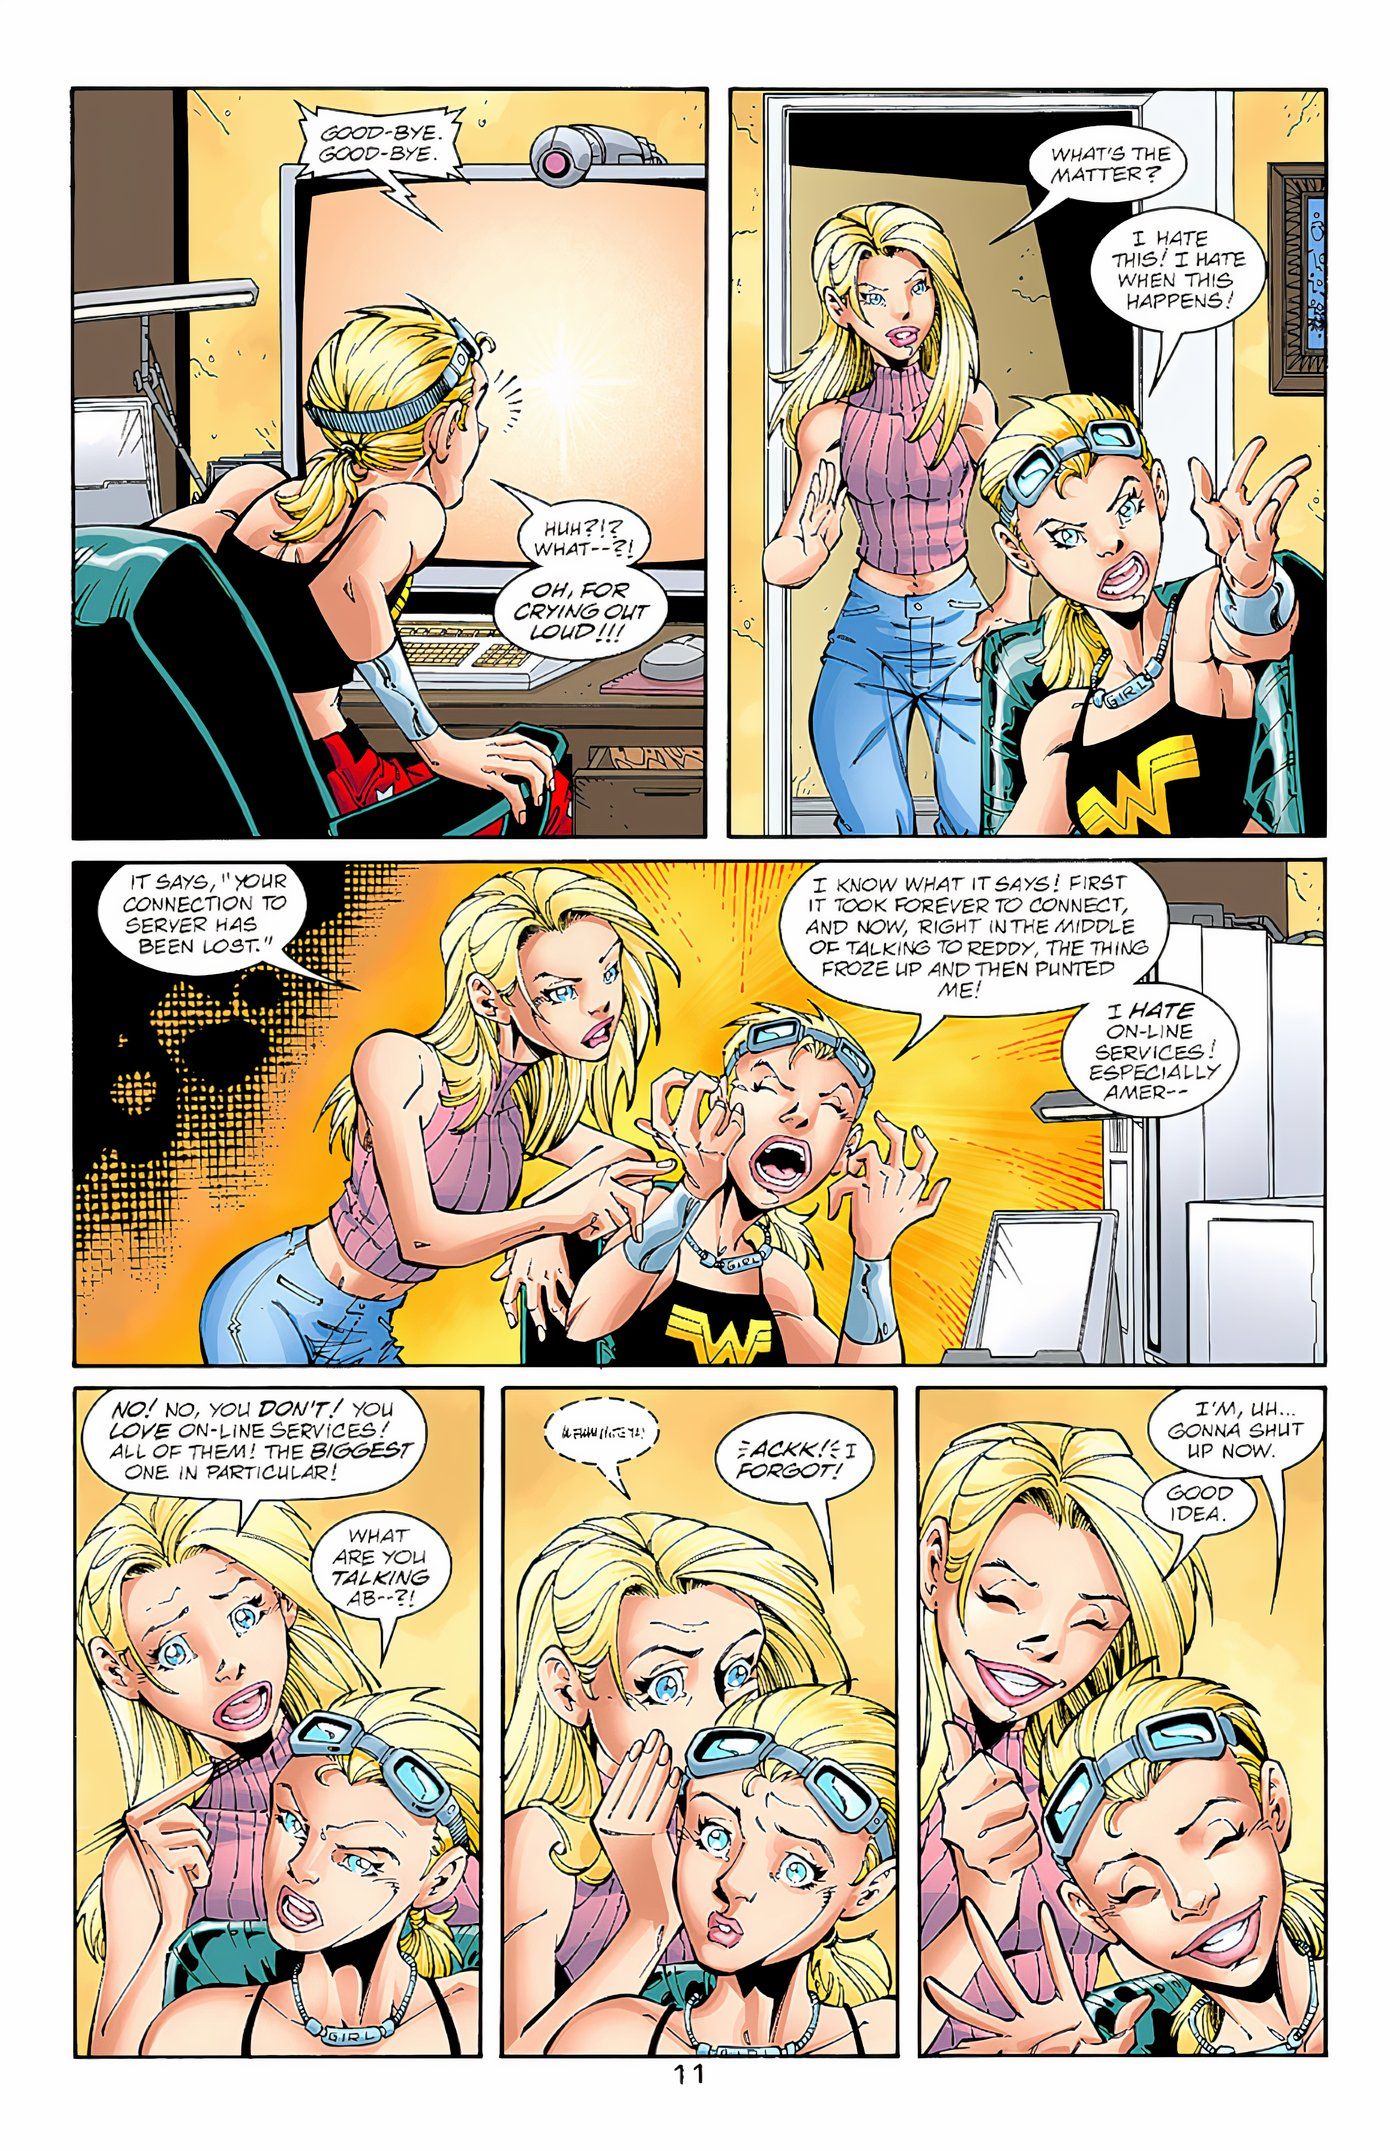 Cassie Learns That DC Has Been Bought Out By Time Warner